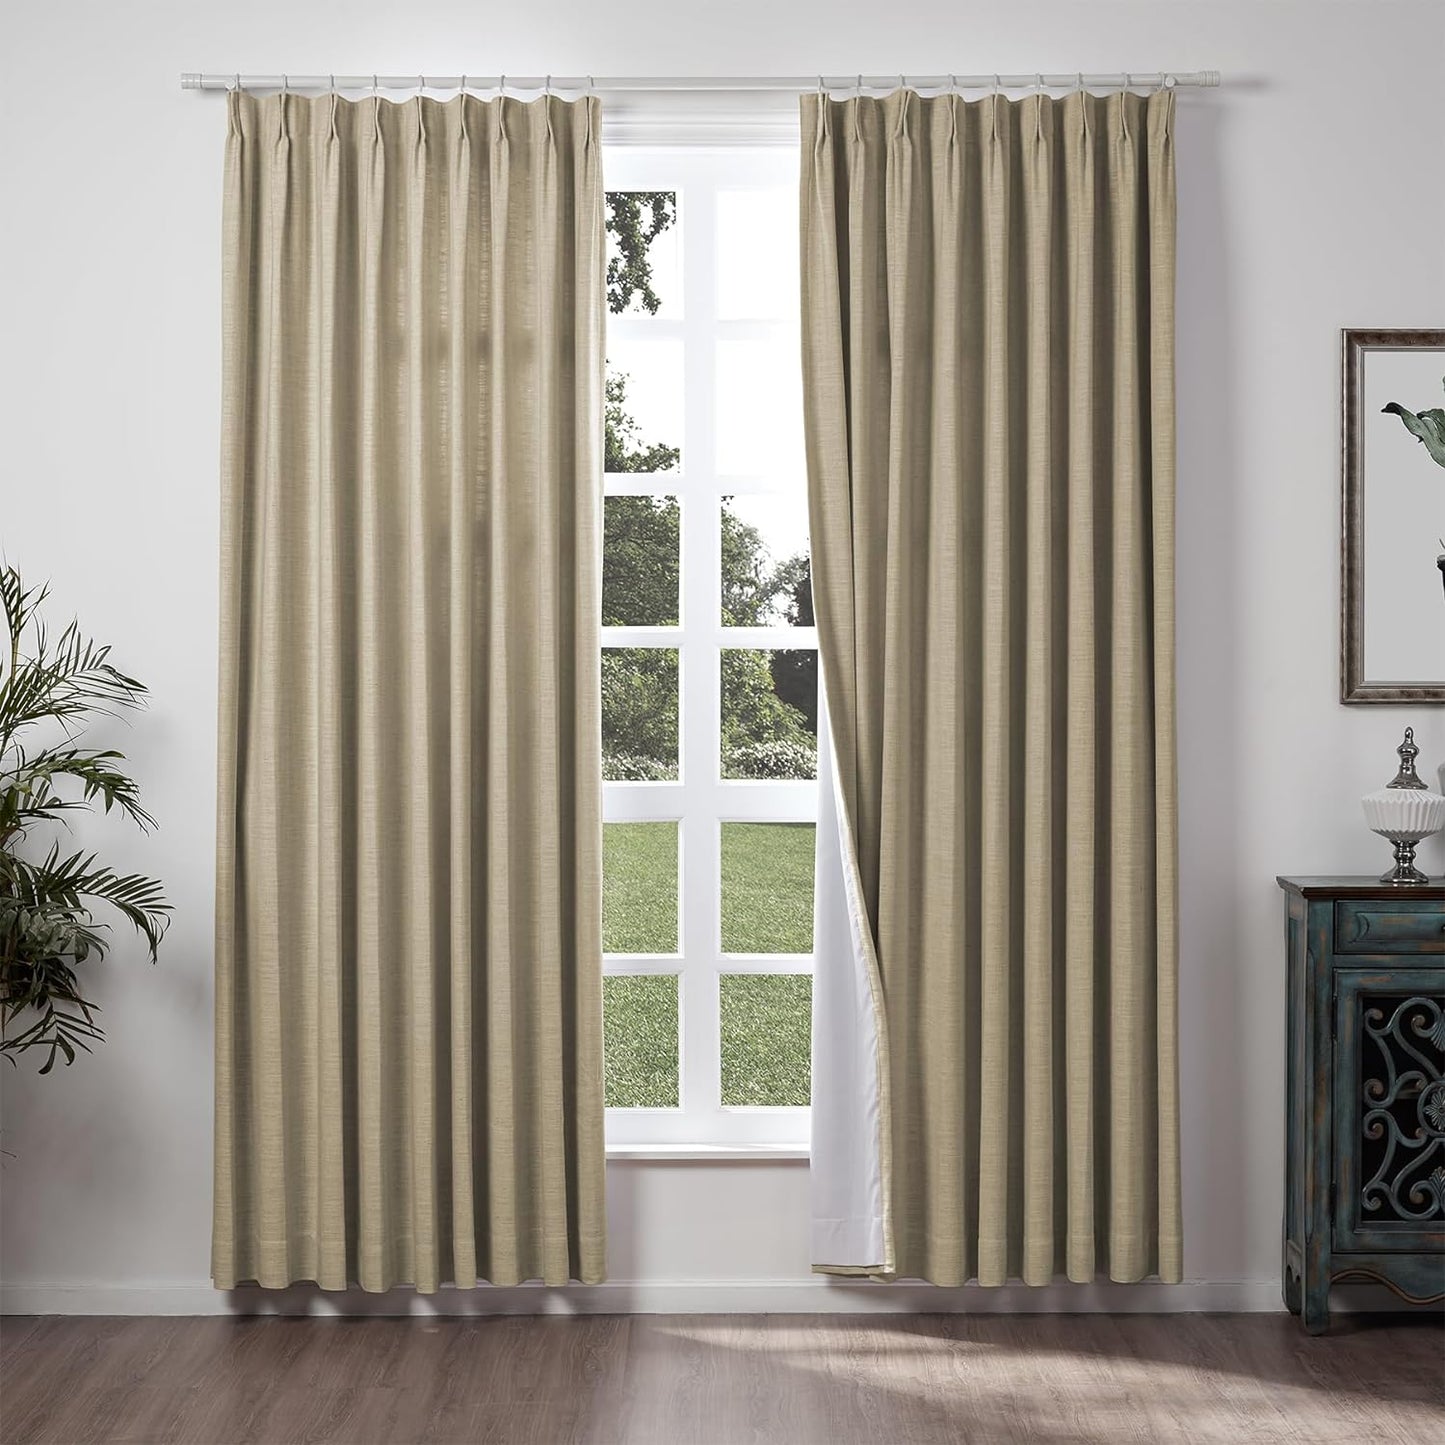 Chadmade 50" W X 63" L Polyester Linen Drape with Blackout Lining Pinch Pleat Curtain for Sliding Door Patio Door Living Room Bedroom, (1 Panel) Sand Beige Tallis Collection  ChadMade Taupe Grey (8) 100Wx84L 